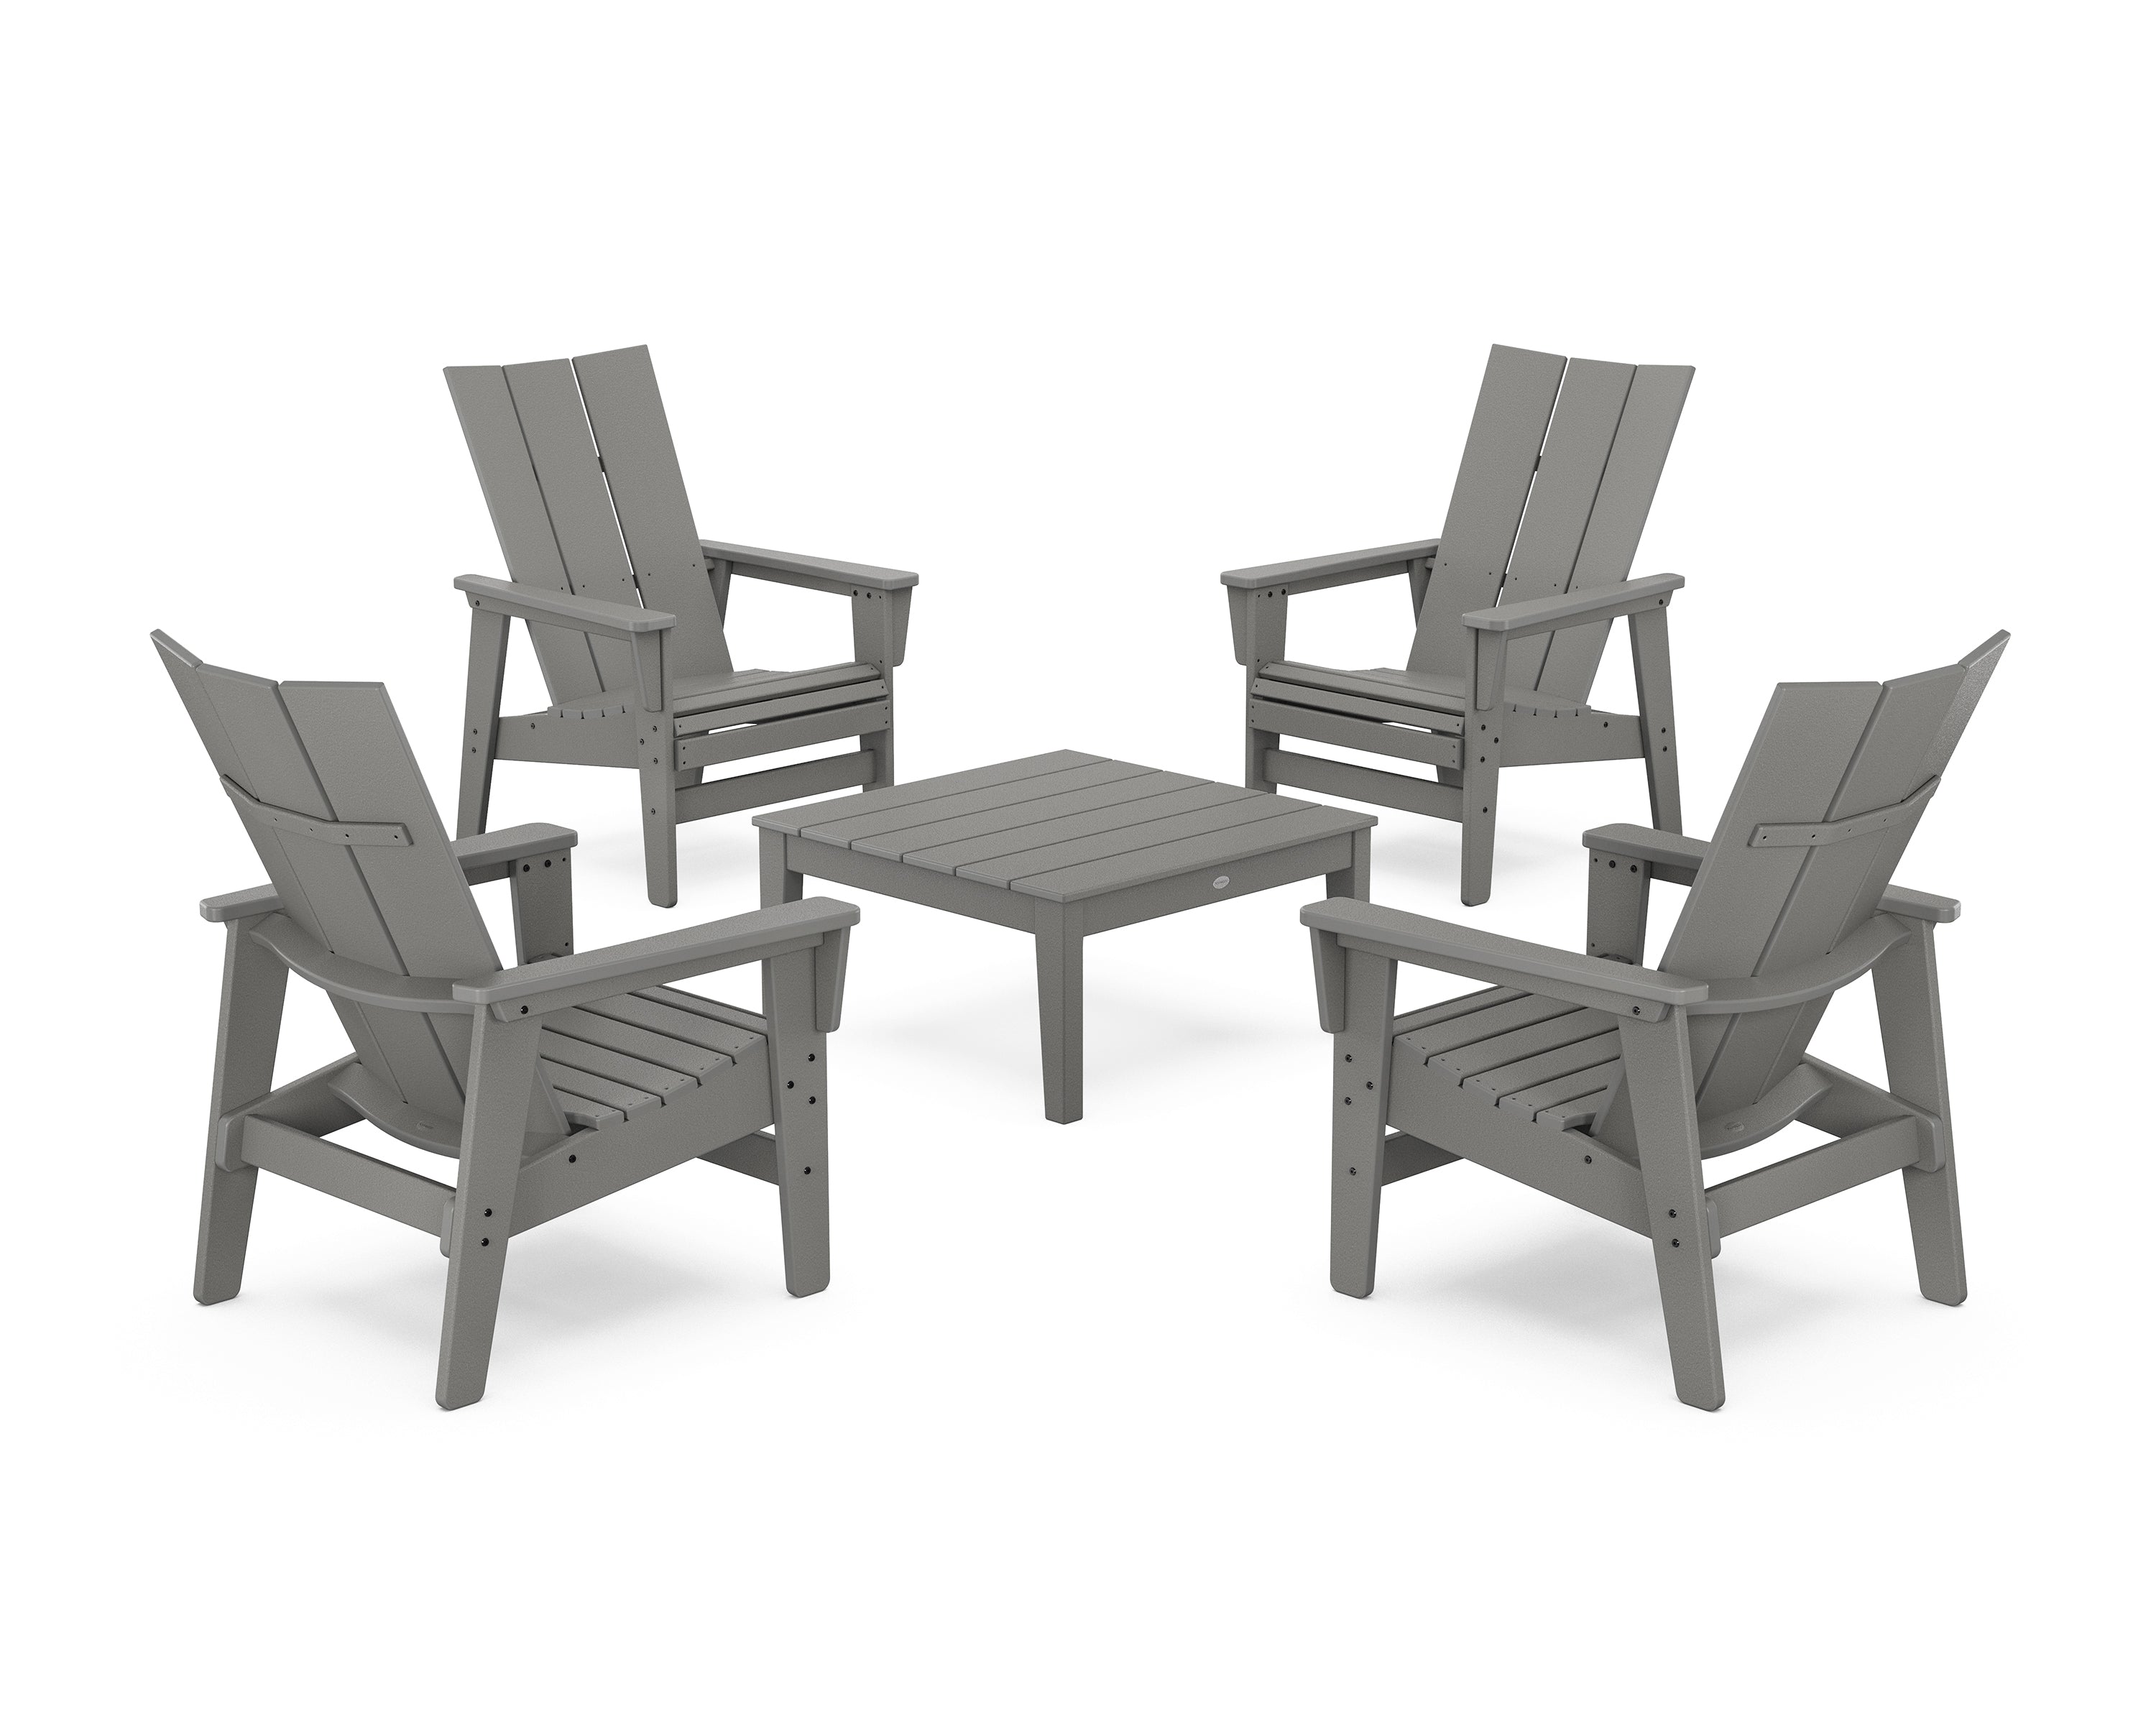 POLYWOOD® 5-Piece Modern Grand Upright Adirondack Chair Conversation Group in Slate Grey